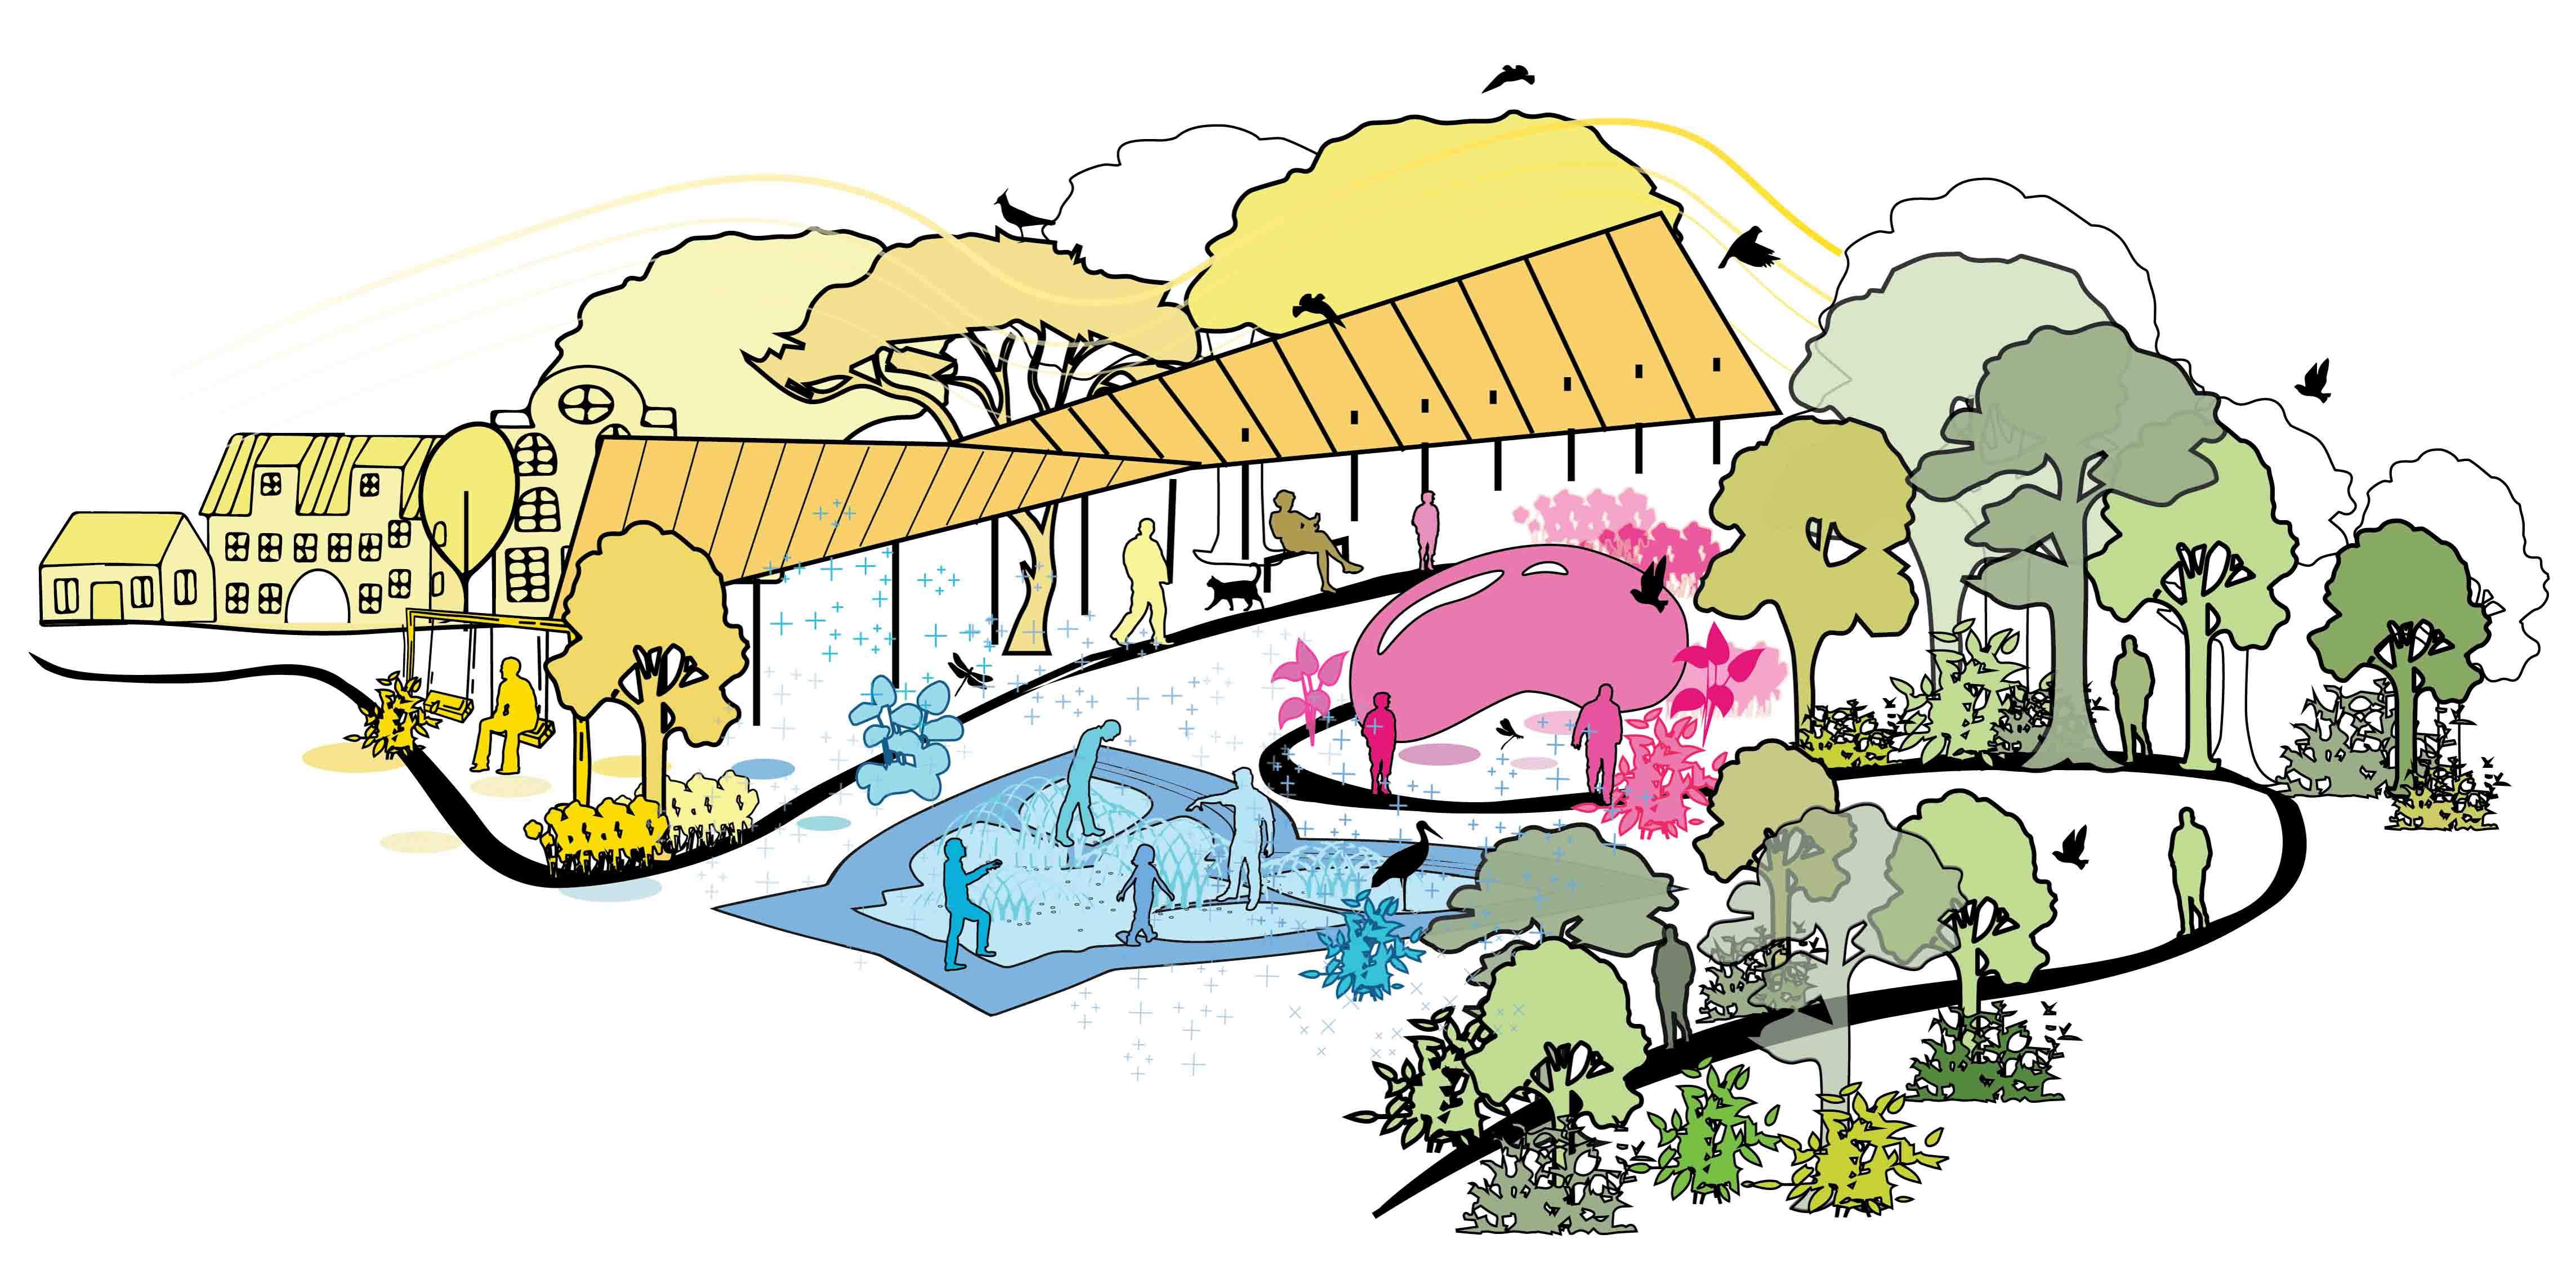 Colorful diagram representing the playfulness and connection to nature at Universal Plaza